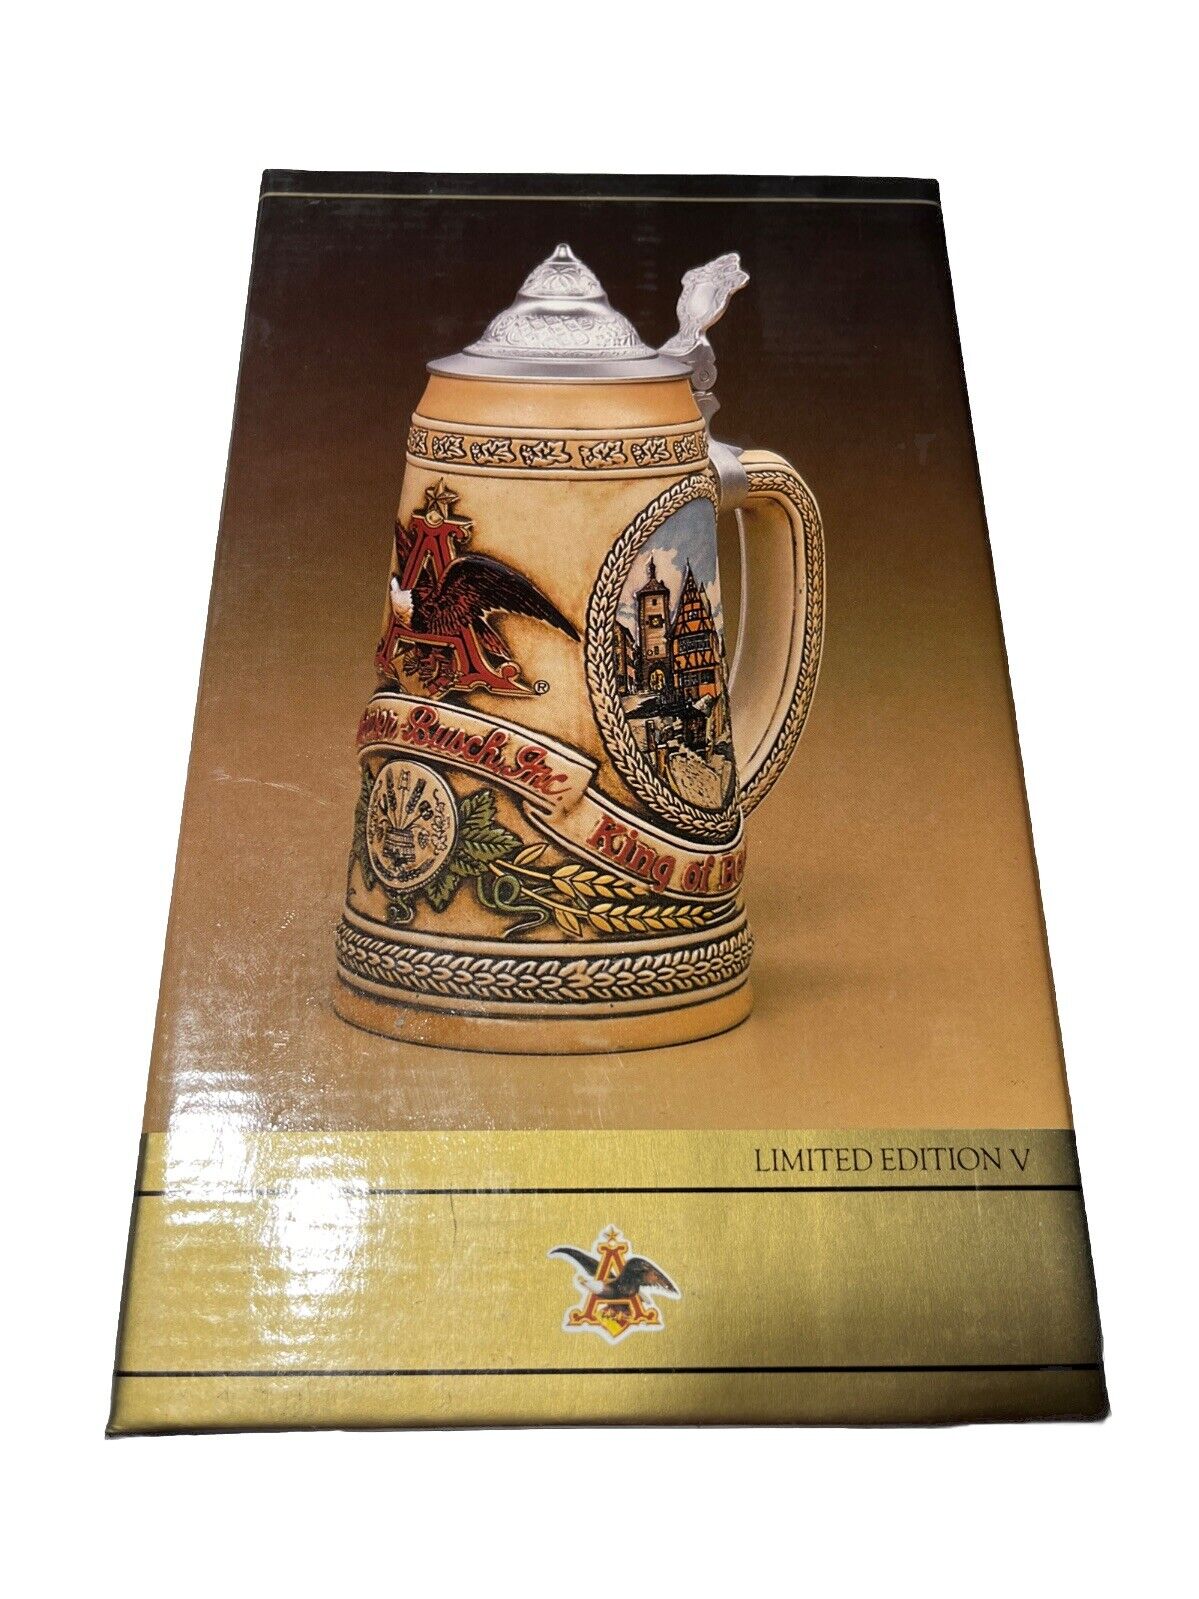 Vintage Anheuser-Busch STEIN Limited Edition IV TOMORROW'S TREASURES Budweiser